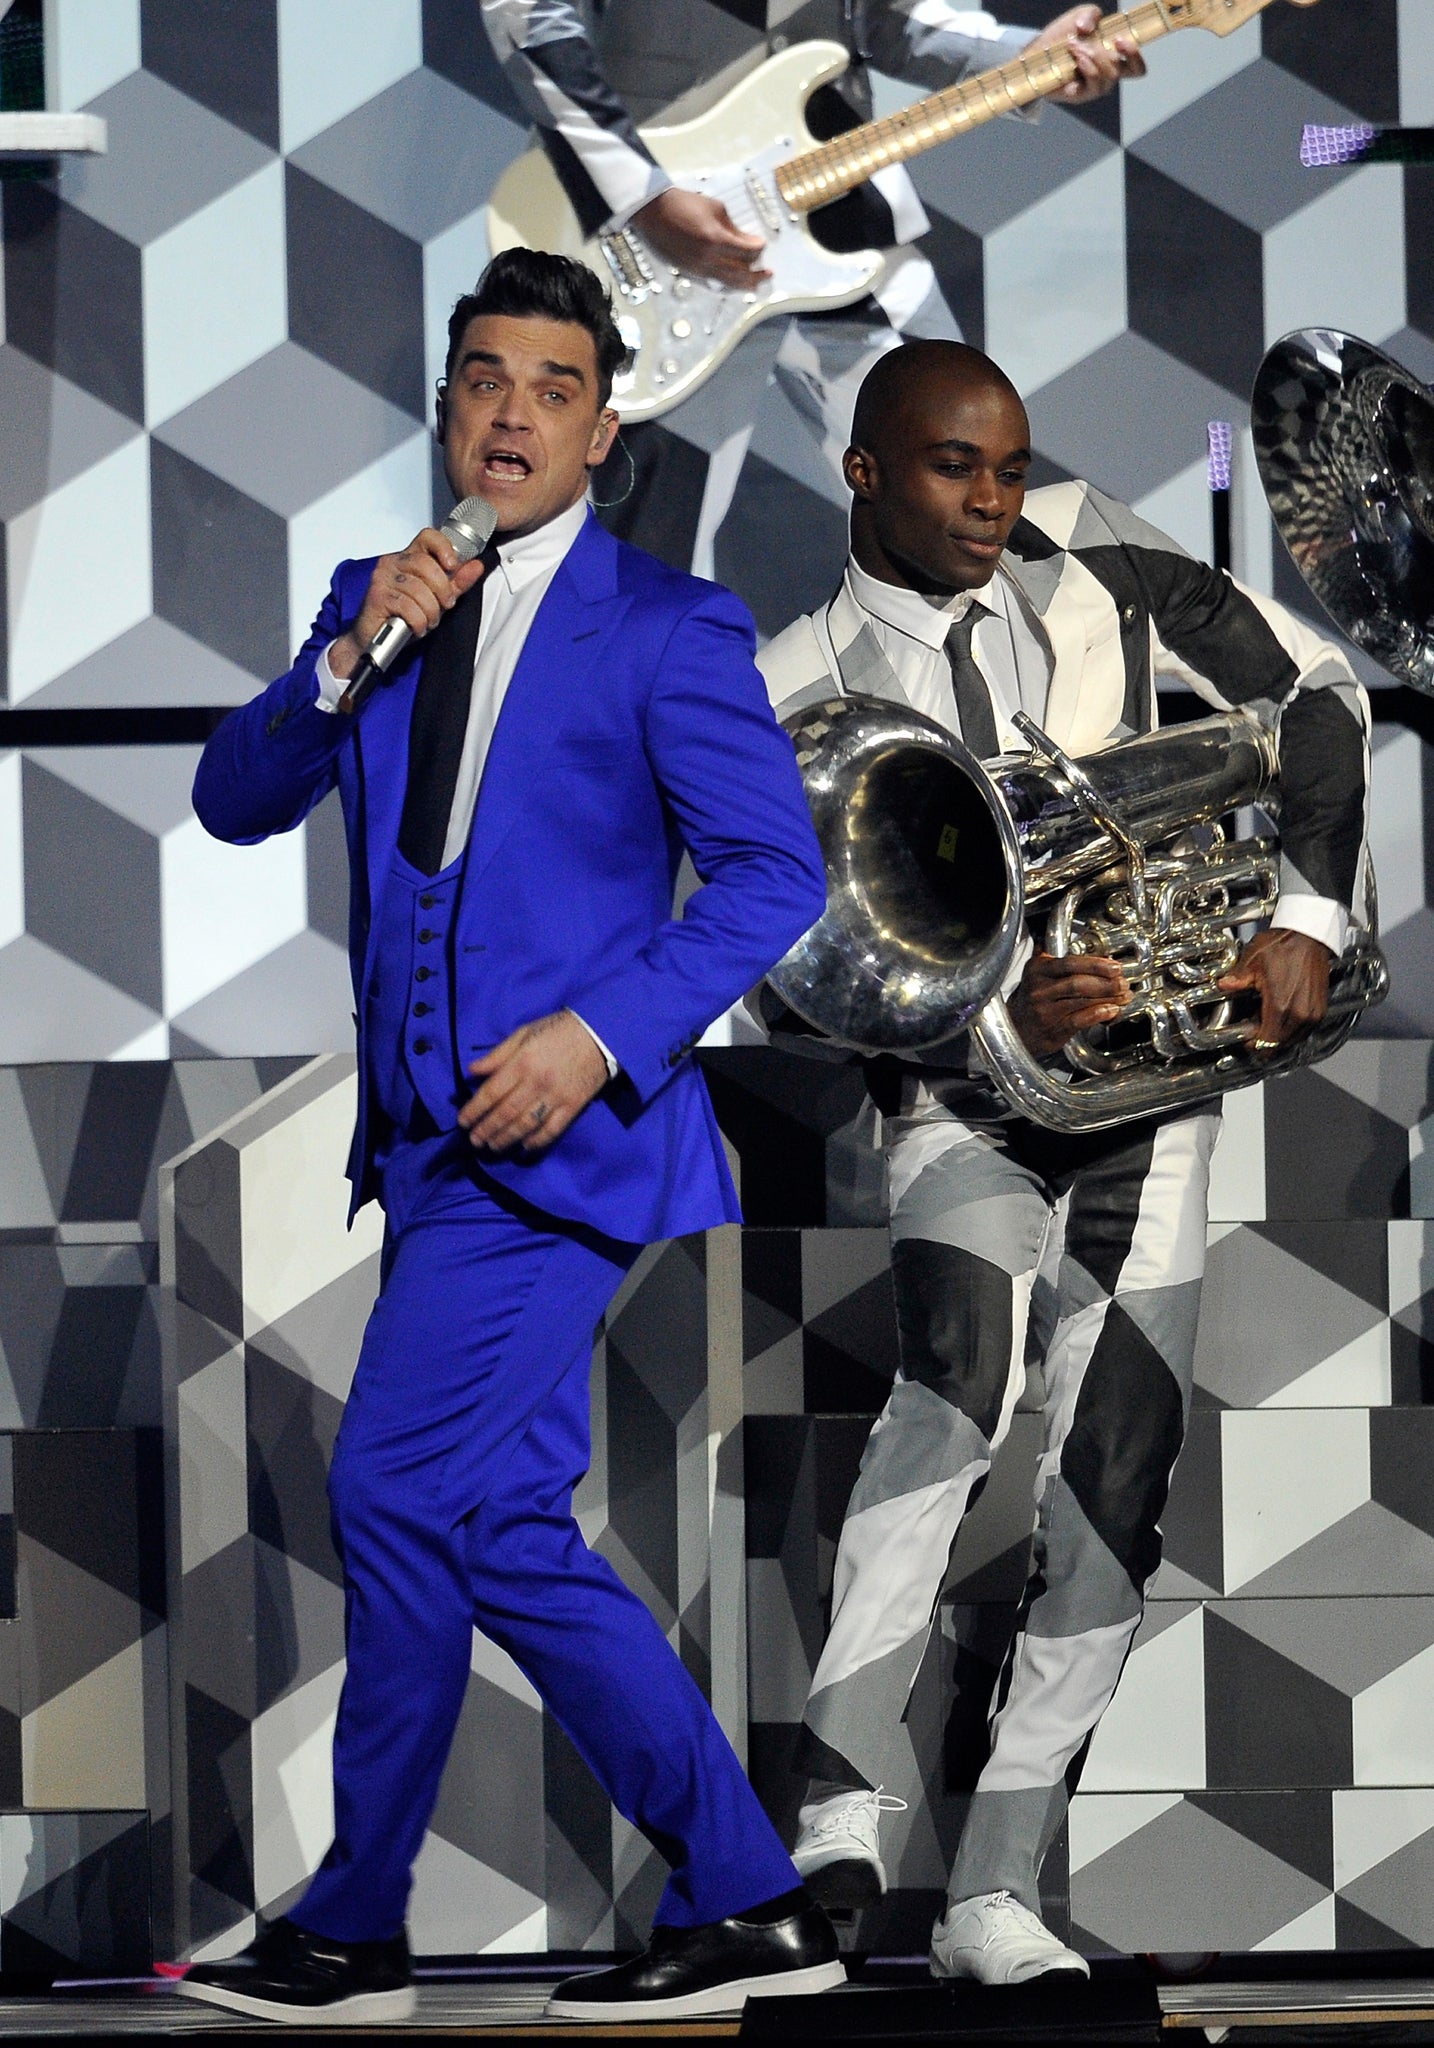 Robbie Williams has complained about the 'boring' Brit Awards 2013 at which he performed in his new single